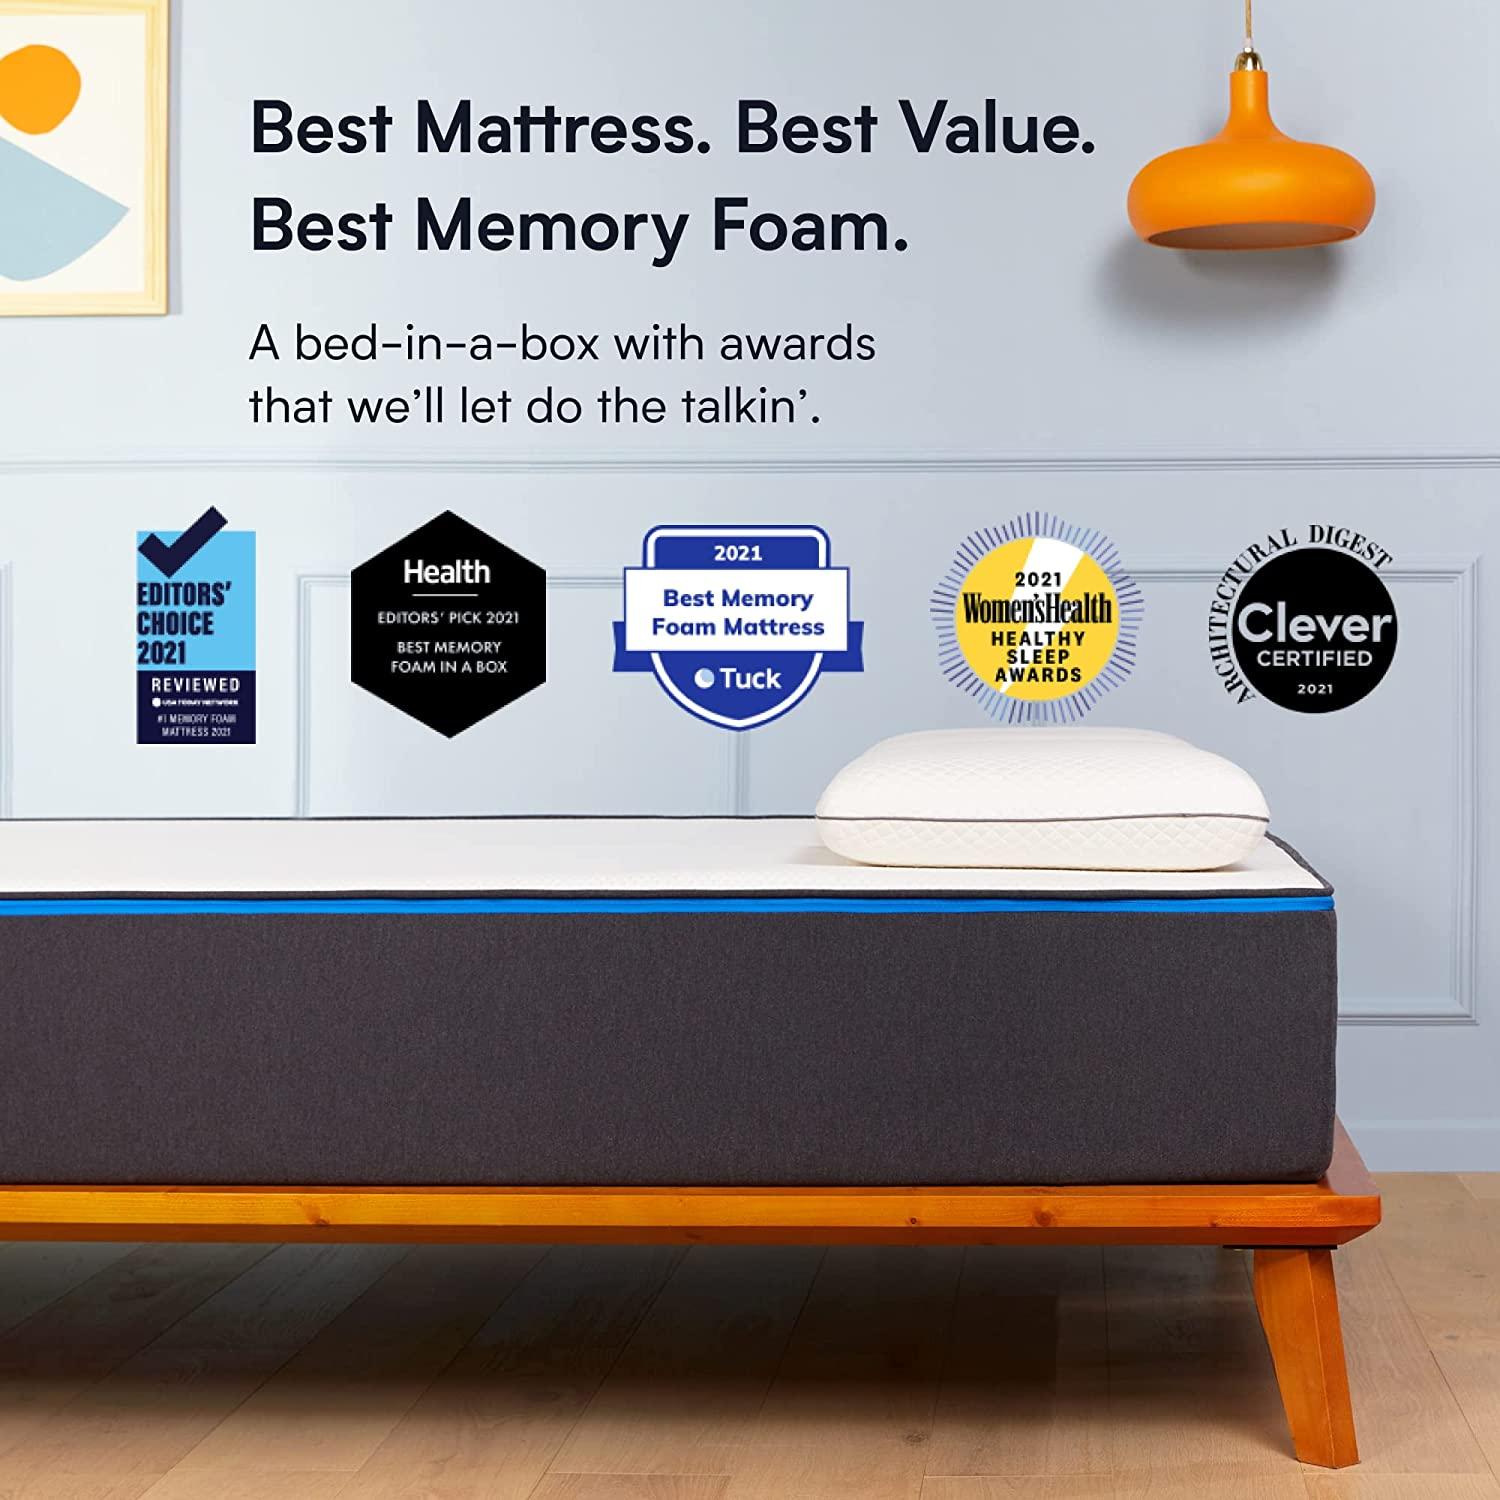 Buy Nectar Queen Mattress 12 Inch - Medium Firm Gel Memory Foam Mattress -  365 Night Trial - 5 Layers of Comfort - Breathable Cooling Action -  CertiPUR-US Certified Foams - Forever Online in Turkey. B0888WJXJX